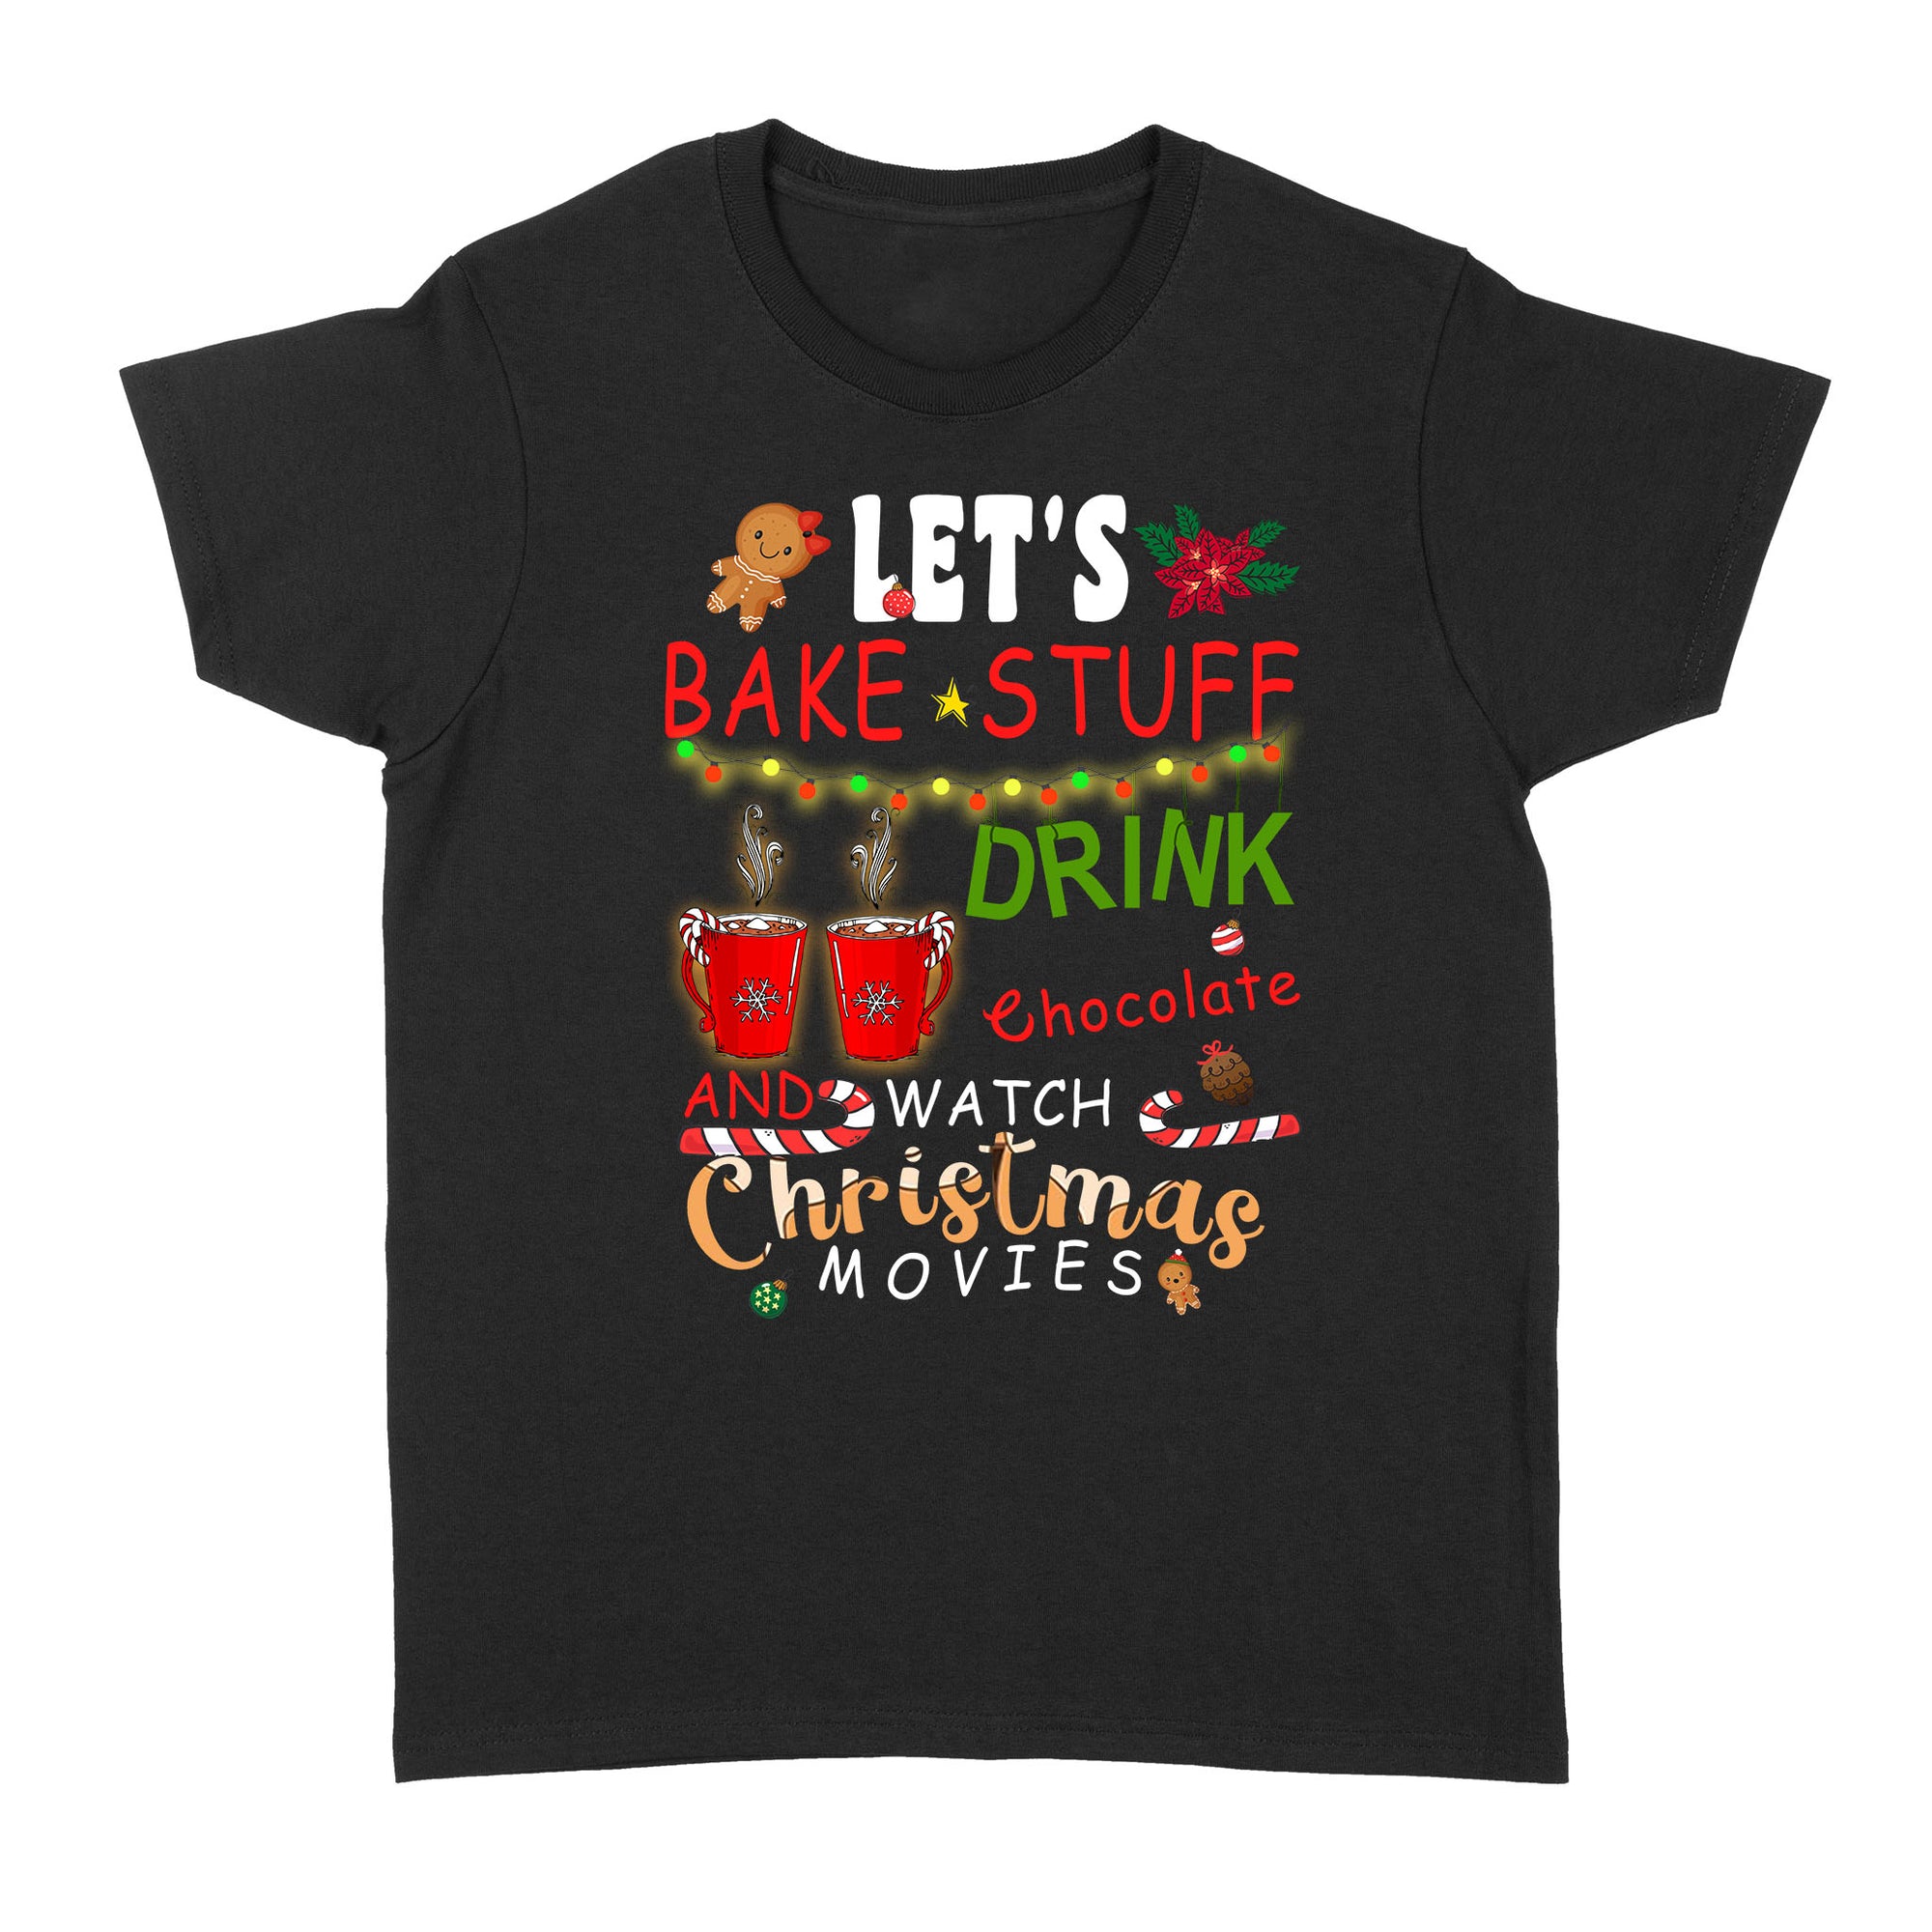 Funny Christmas Gifts Ideas Let's Bake Stuff Drink Chocolate And Watch Christmas Movies B - Standard Women's T-shirt